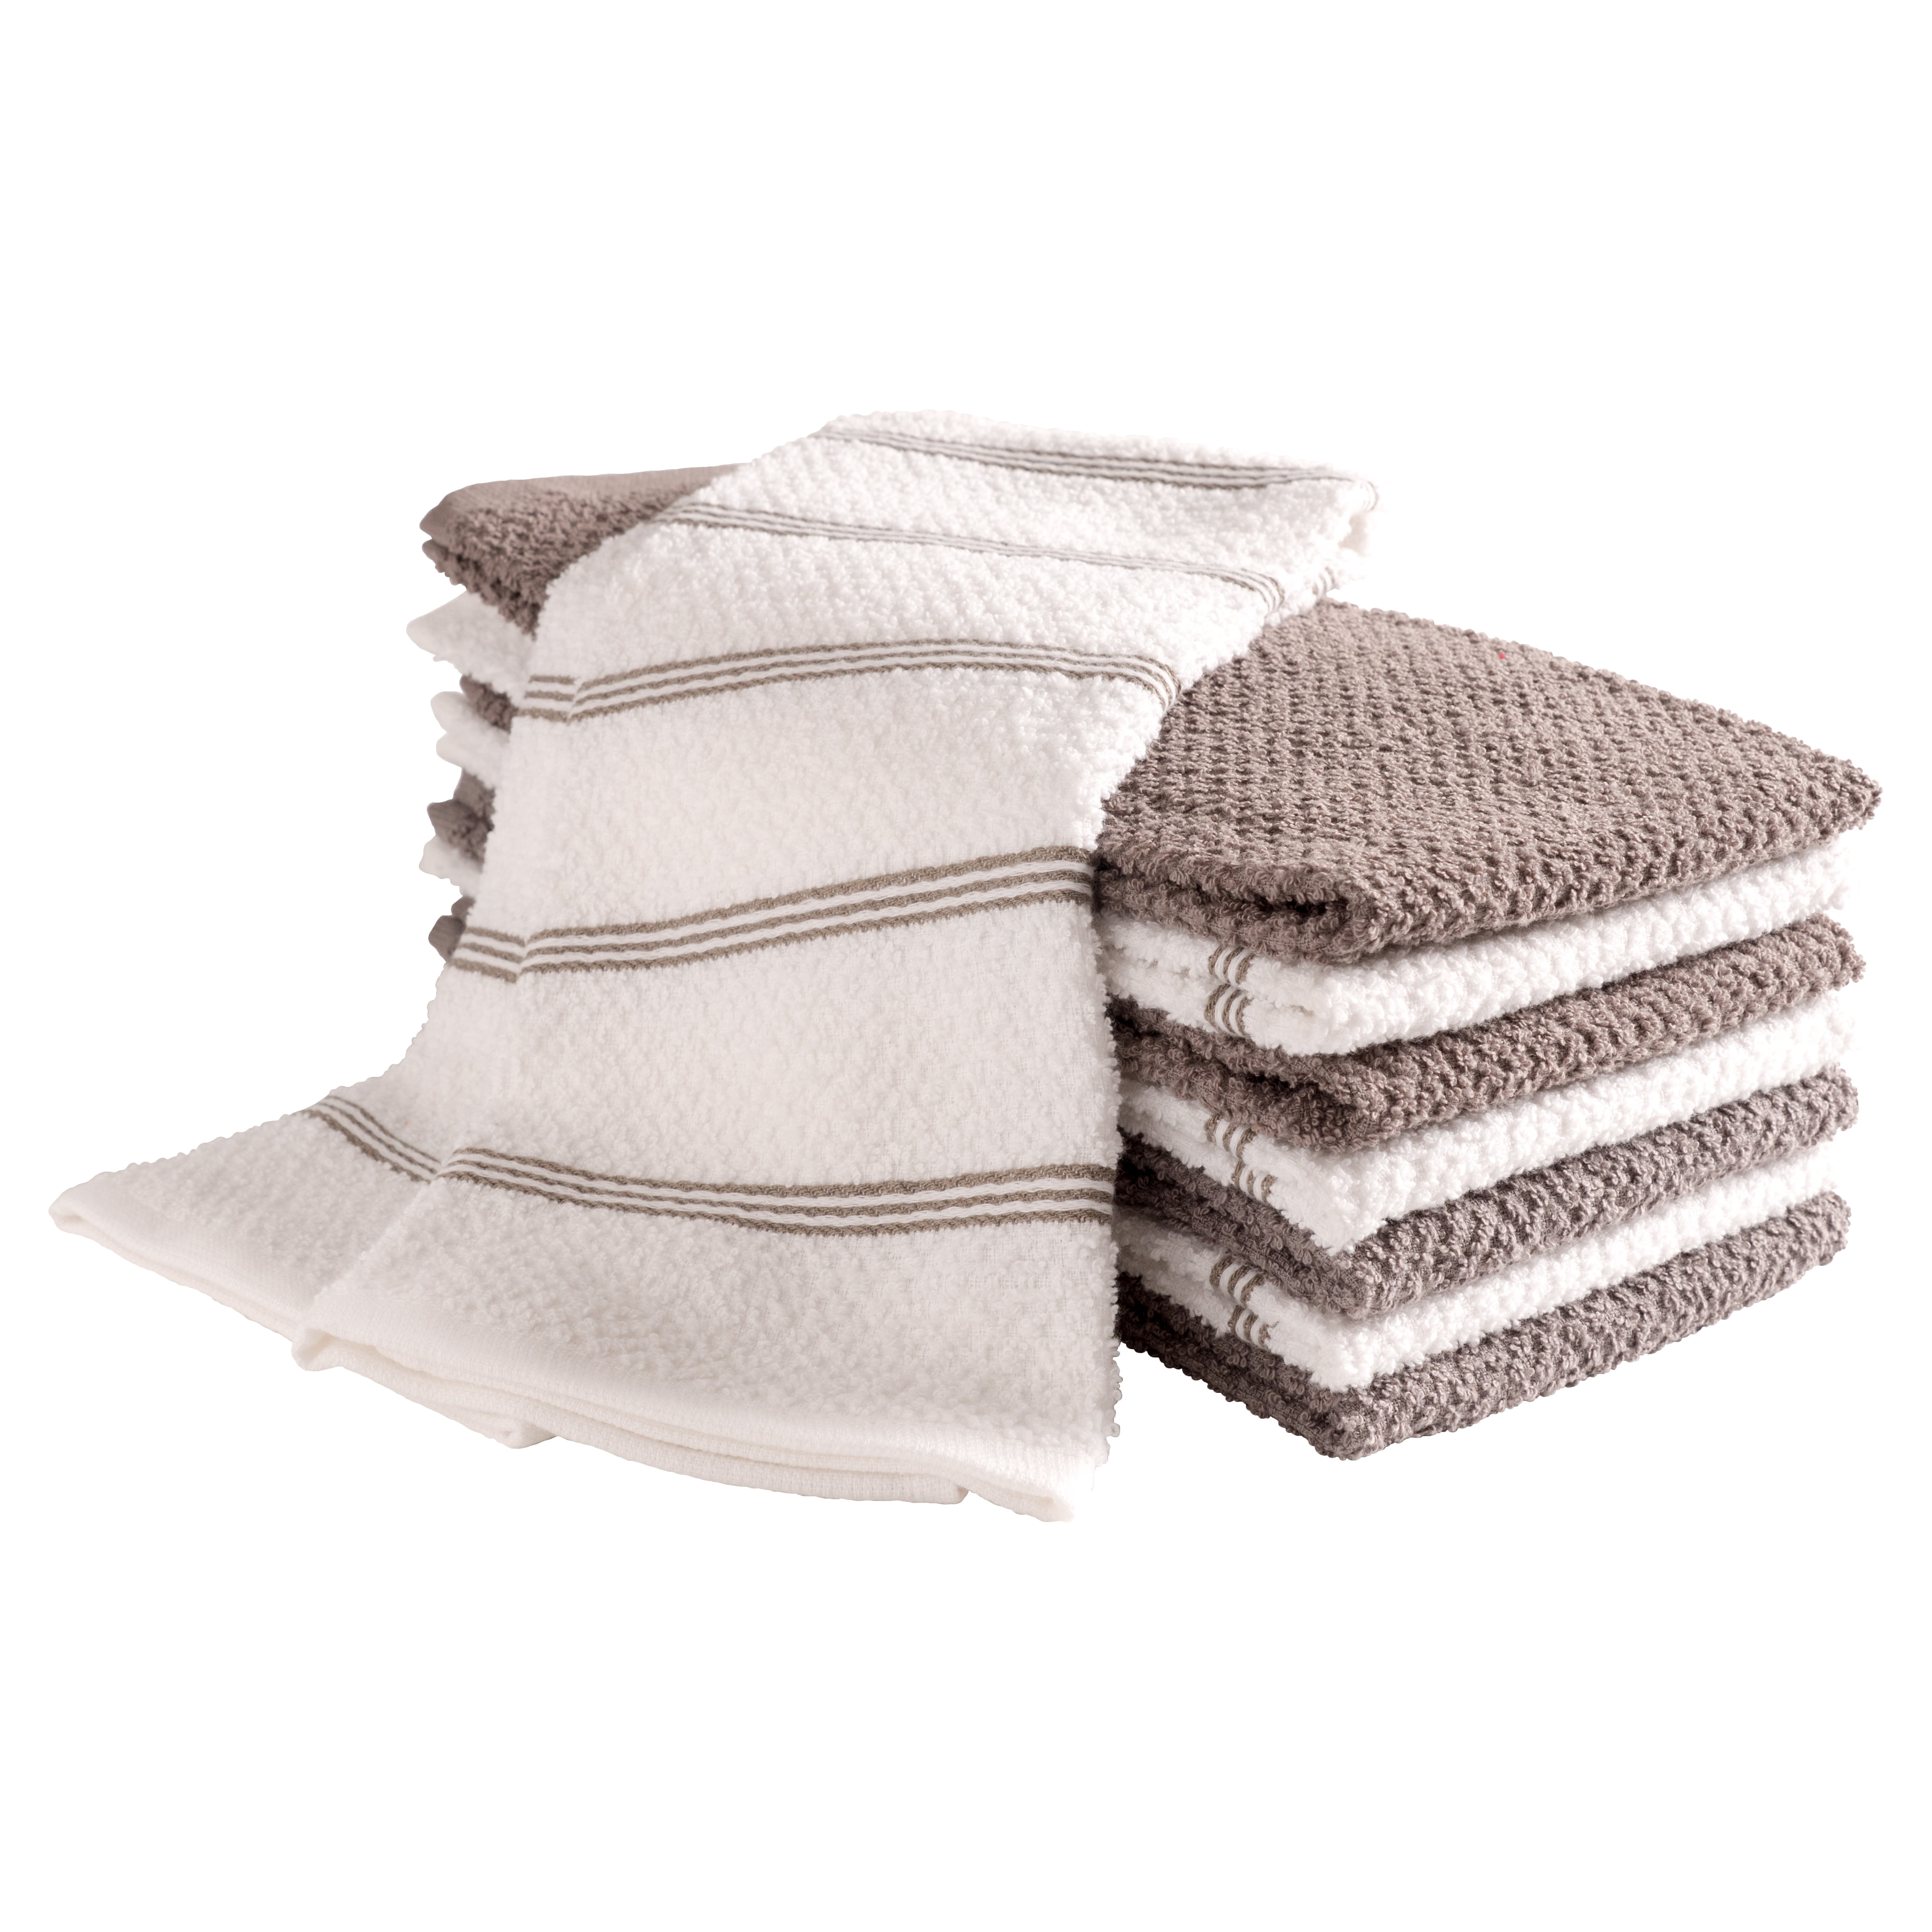 COTTON CRAFT Amazing Kitchen Towels - Set of 8 Terry Towels - 100% Cotton  Euro Café Waffle Weave Dish Towel Set - Soft Absorbent Quick Dry Low Lint